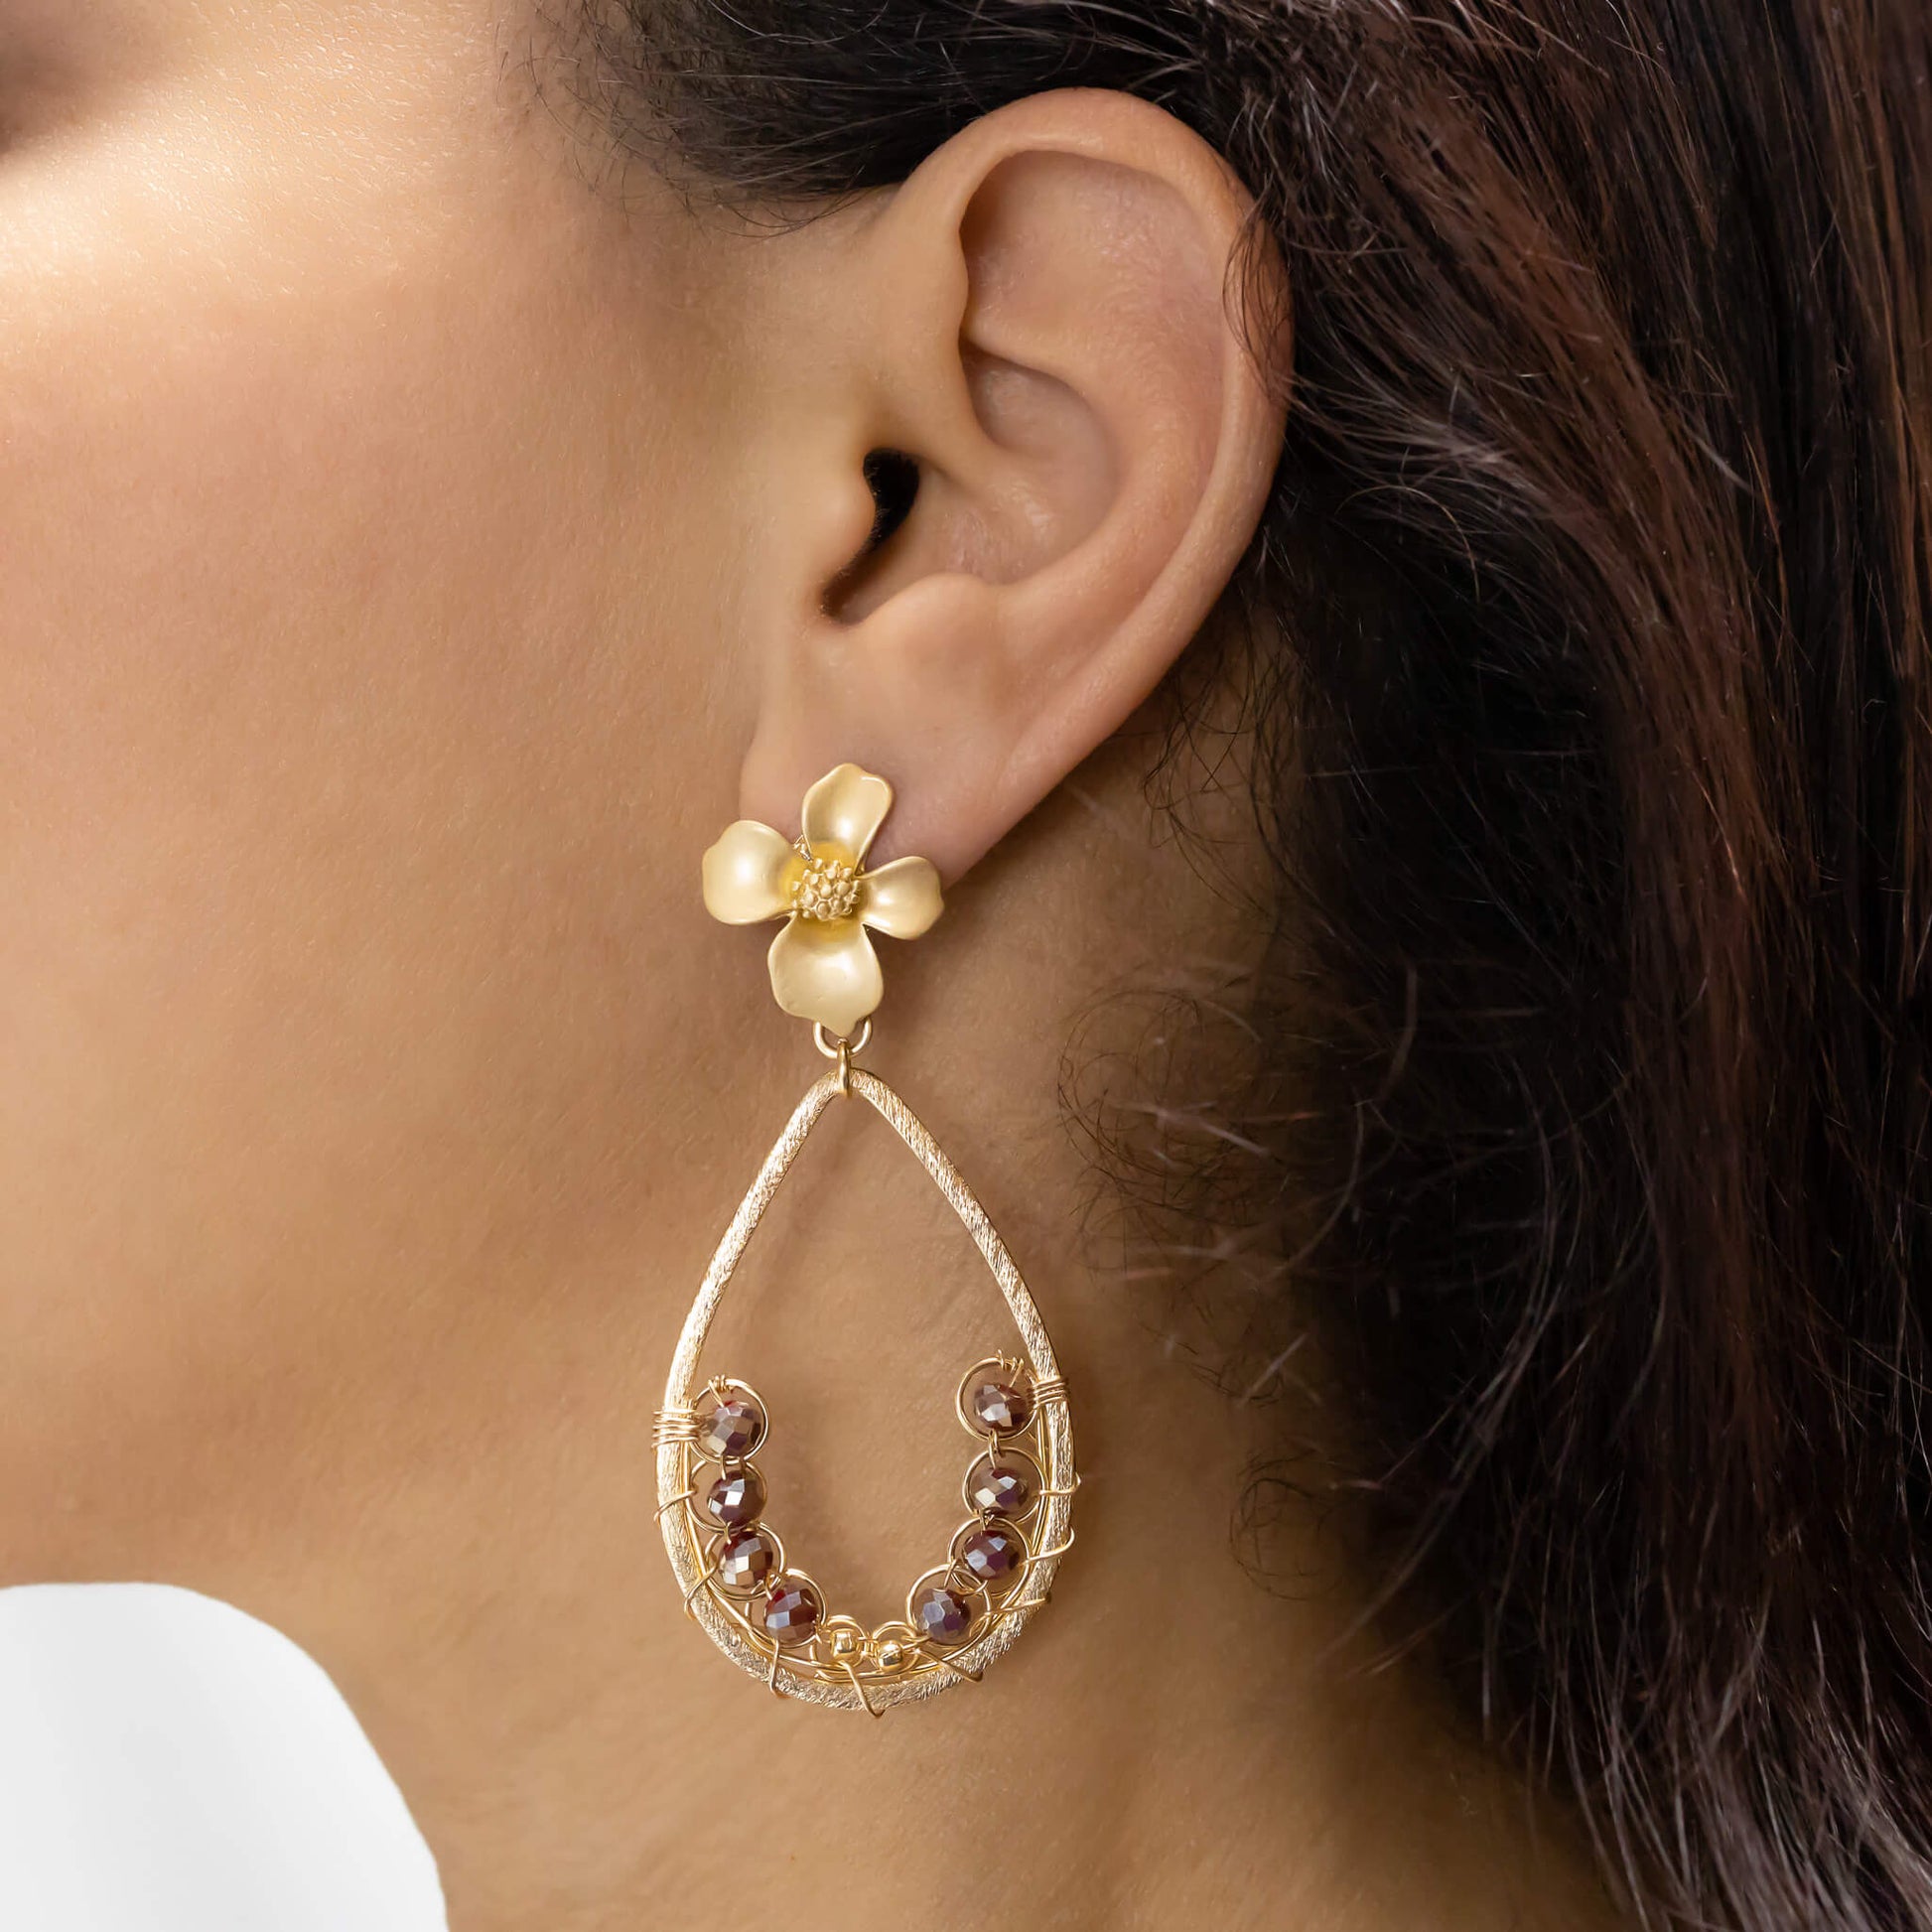 Sophia Earrings on a model. Gold Color Earrings with  Rounded Crystal Beads. Floral Stud Earrings. 